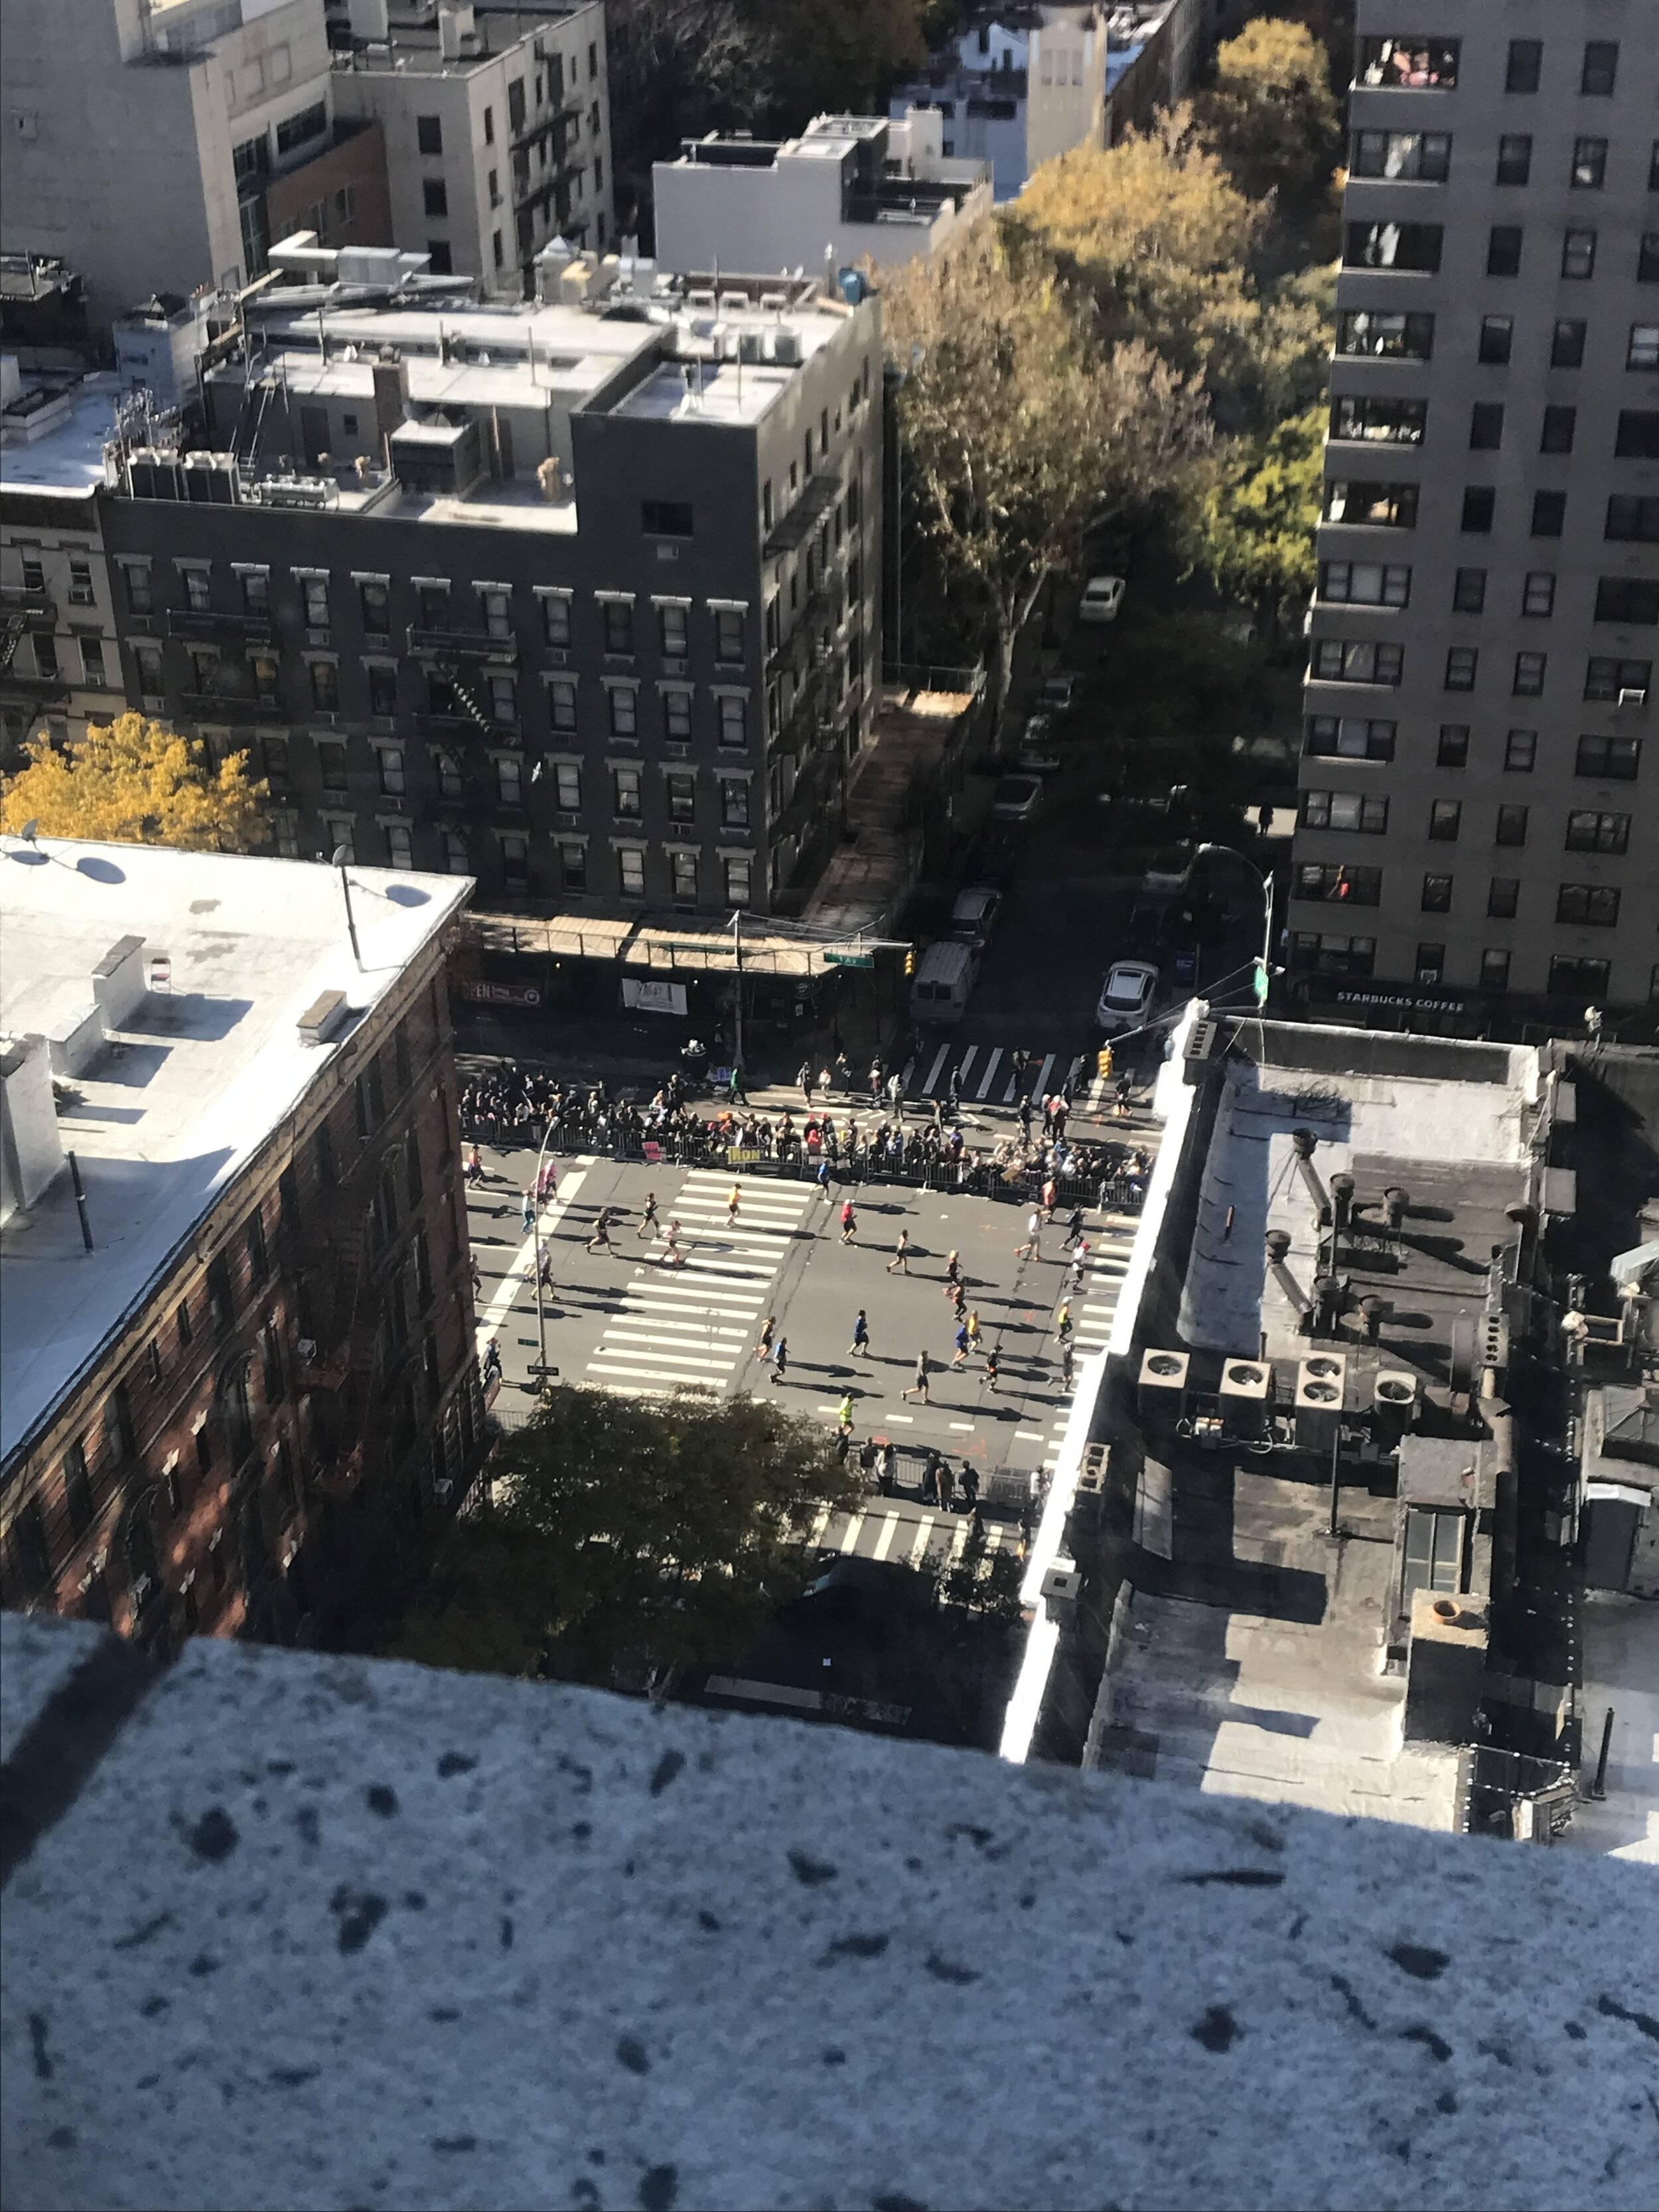  We can watch the NYC marathon from the lab.   November 2018 